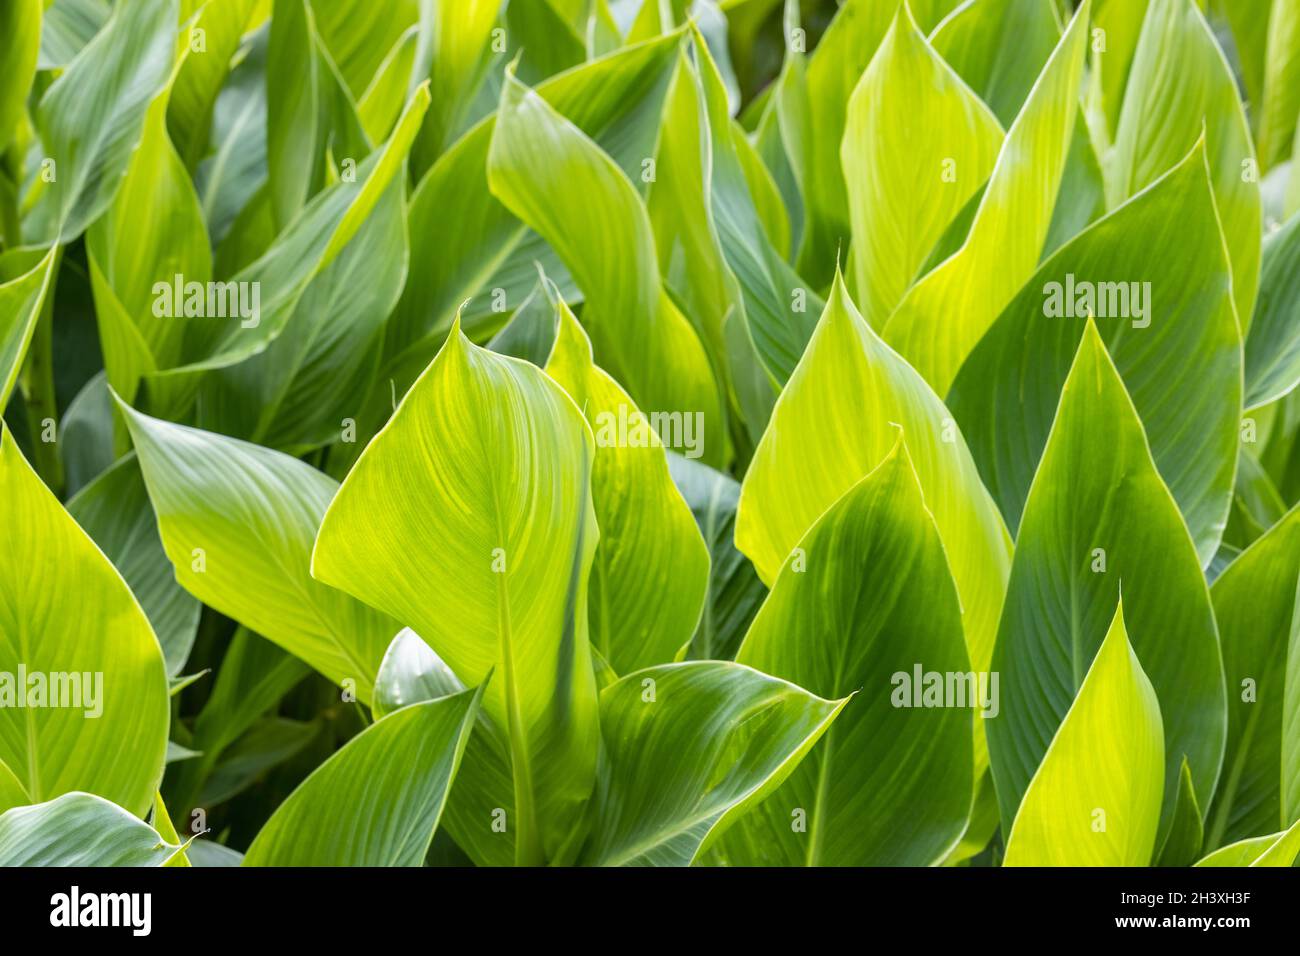 Bright green leaves background Stock Photo